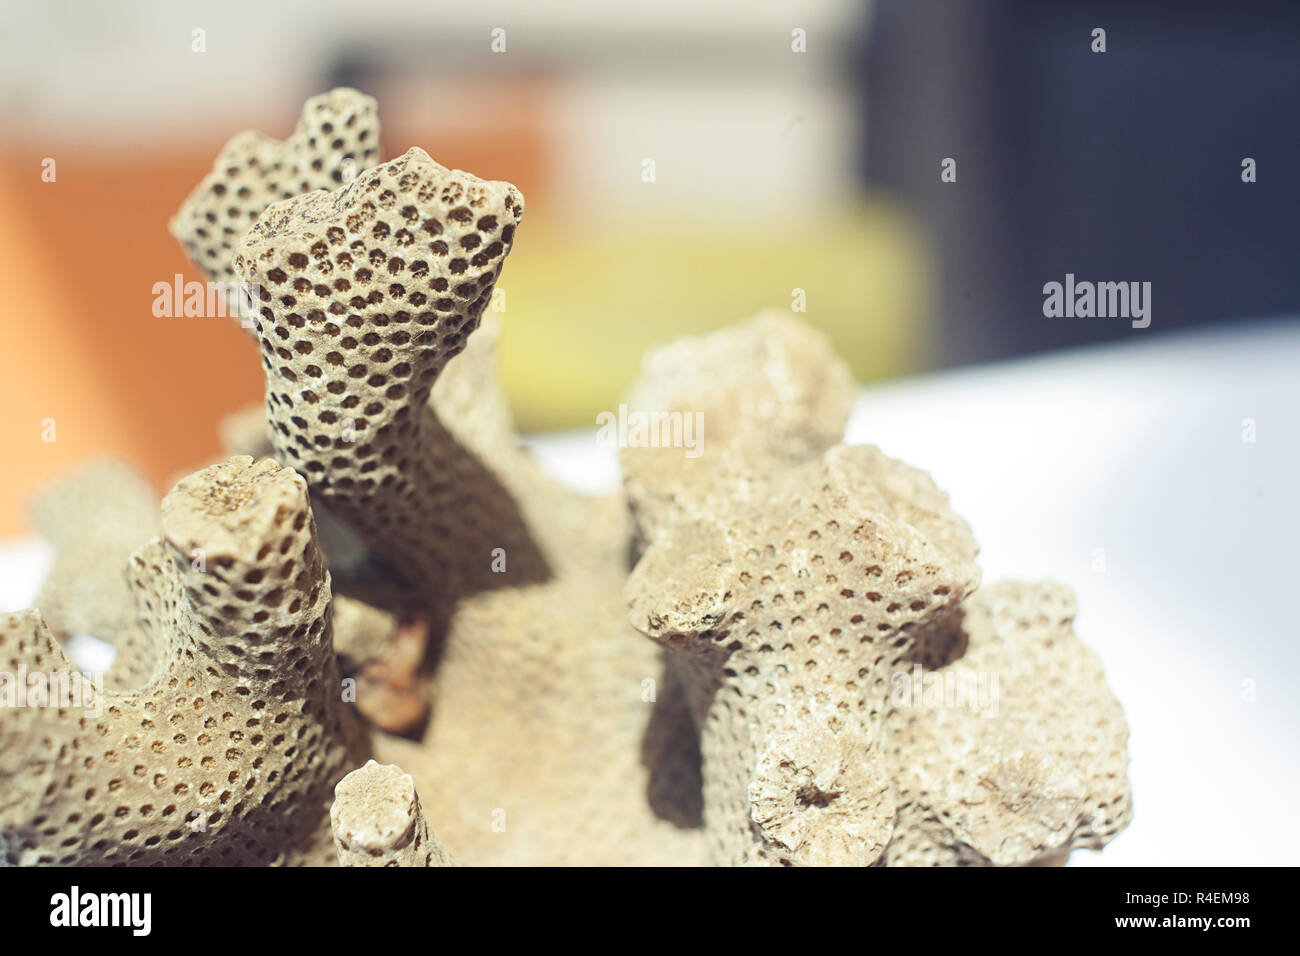 Dead coral that look like brain or bee hive Stock Photo